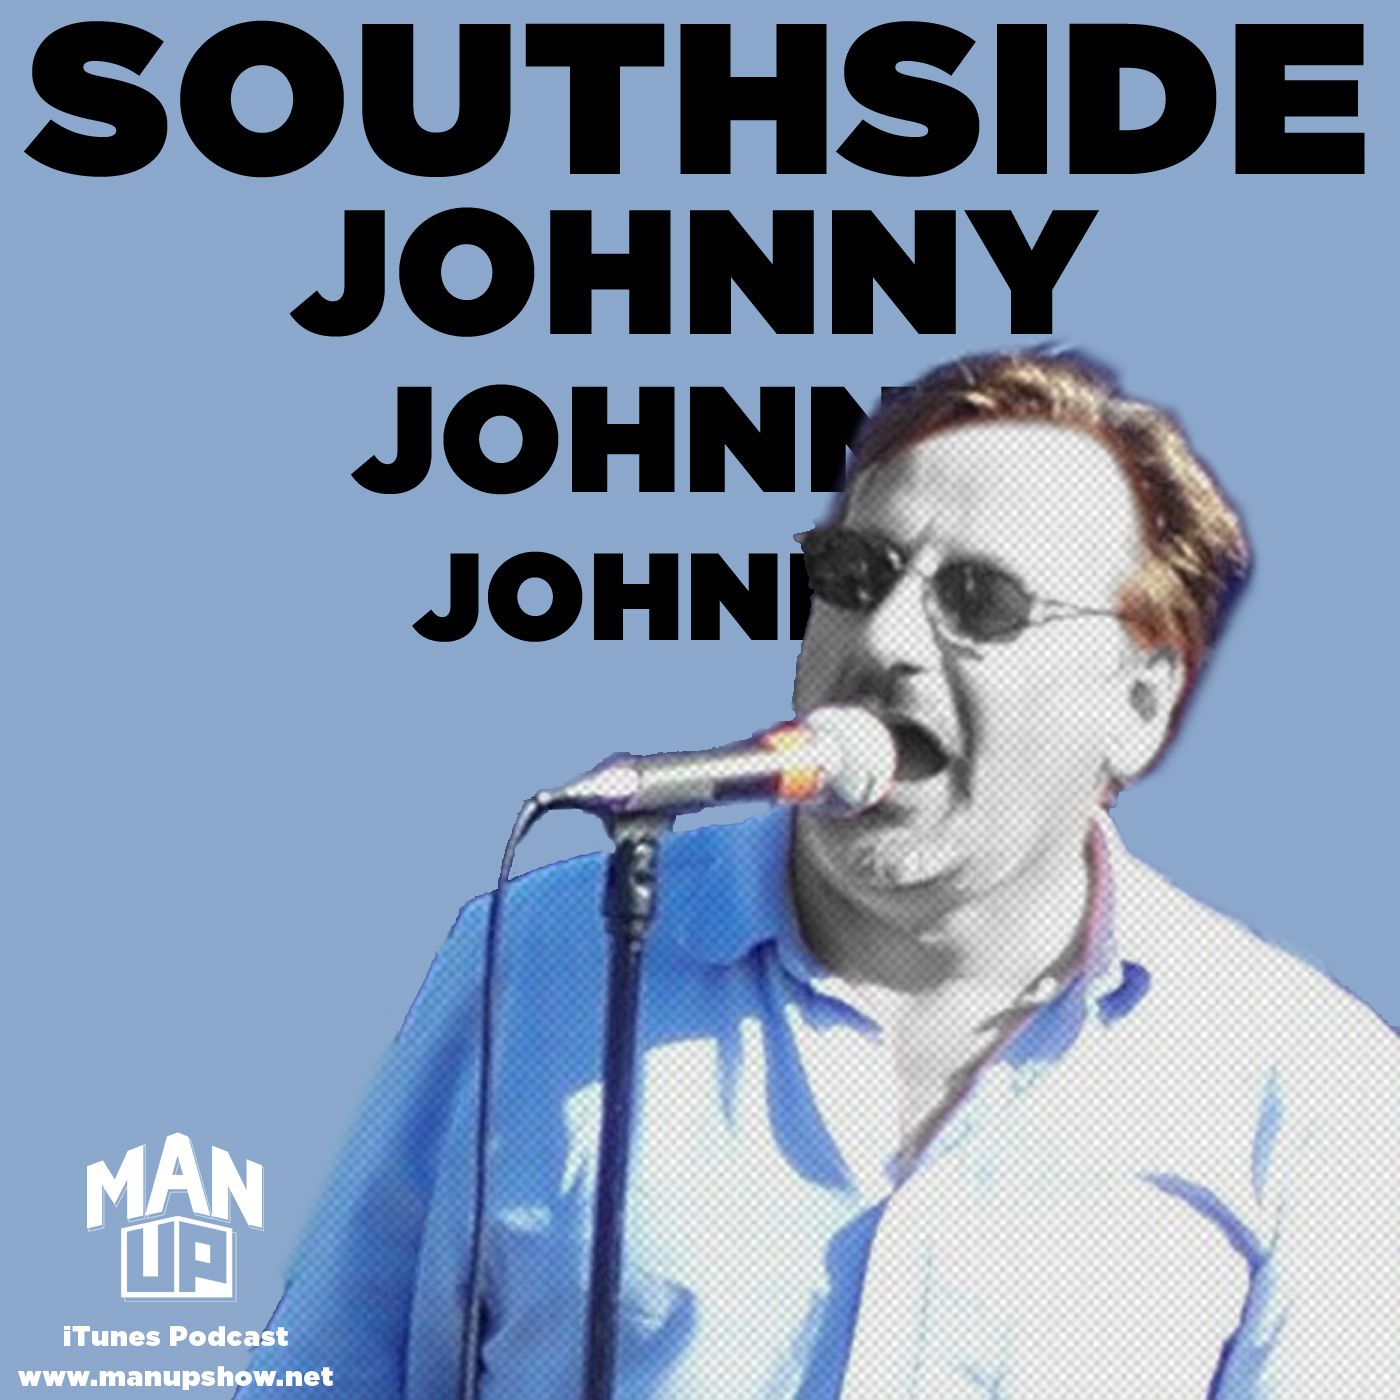 Southside Johnny: godfather of the "Jersey Sound" in rock might be our funniest guest yet!